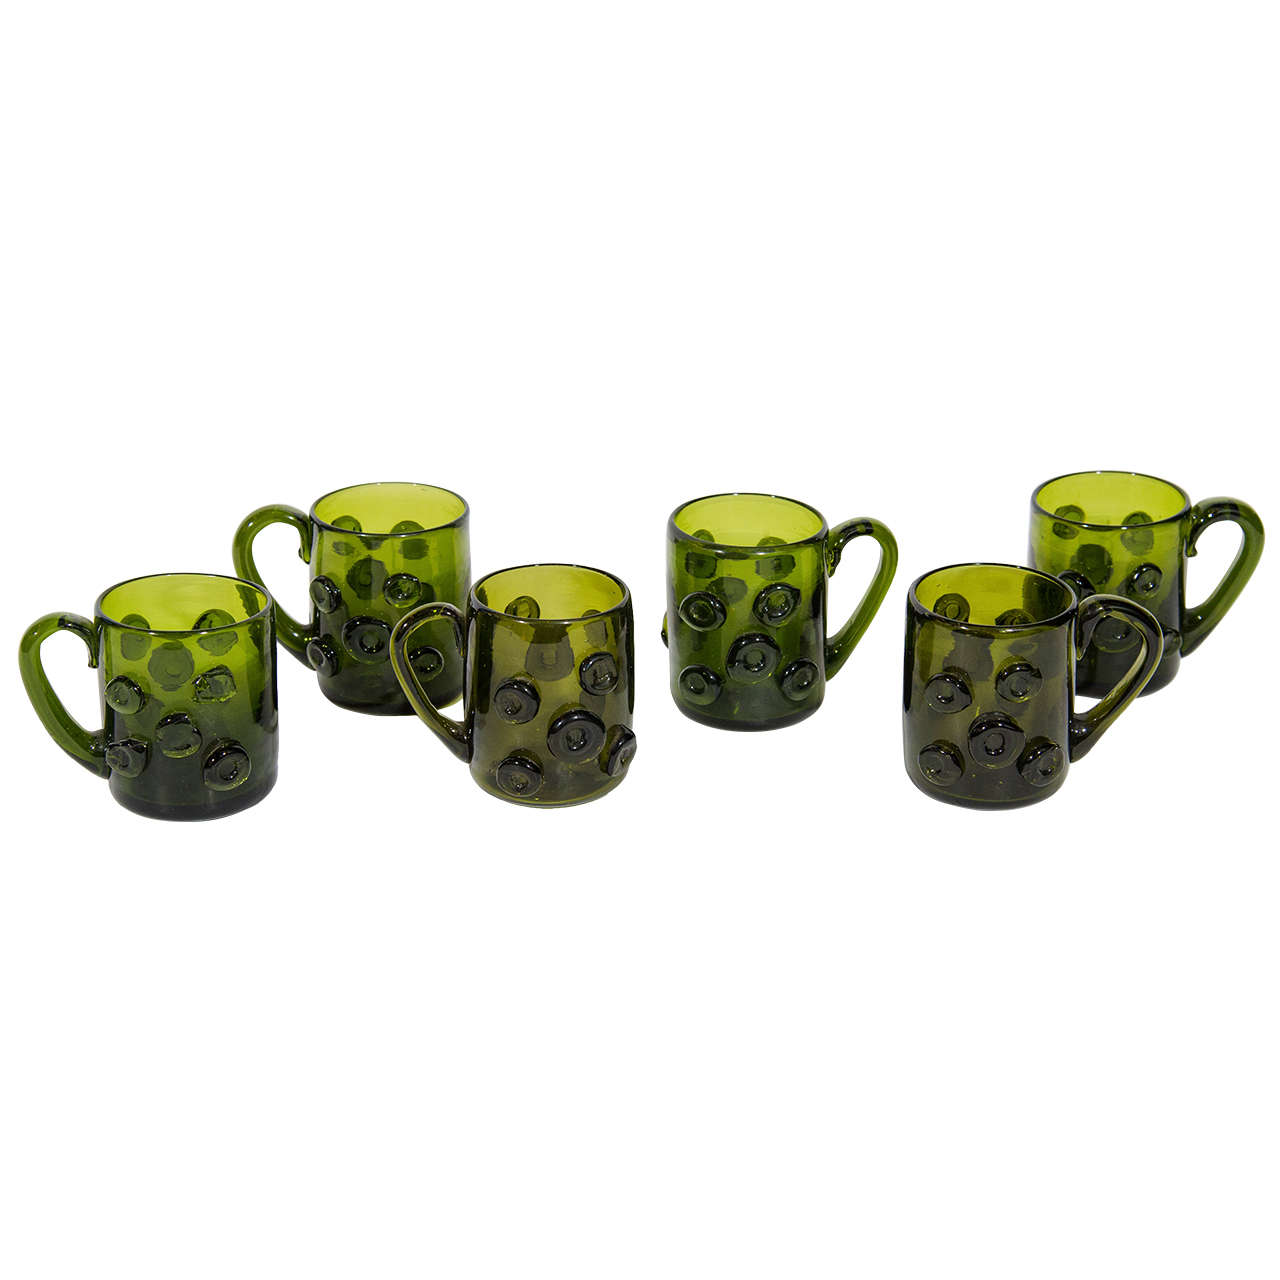 Set of six charming handblown glass mugs perfect as espresso cups or liqueur glasses. The glasses have a beautiful emerald green tone and feature circular prunts along the exterior, as well as fine sculpted glass handles.